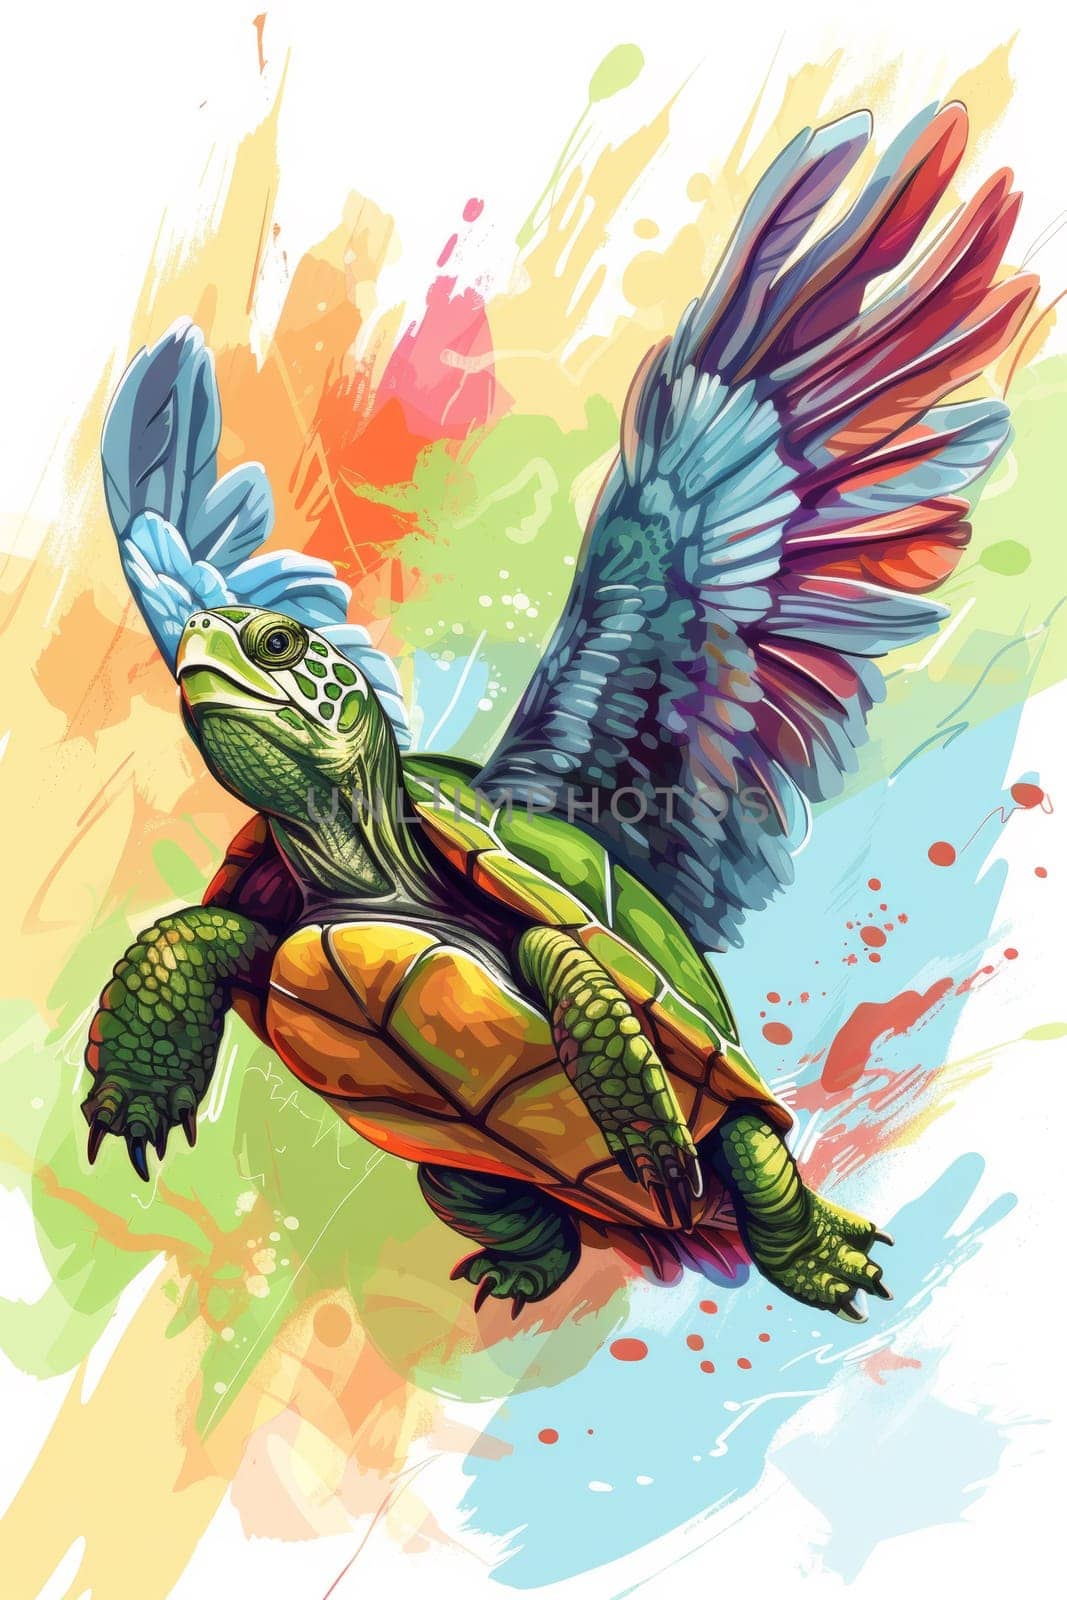 A painting of a colorful turtle with wings flying in the air, AI by starush